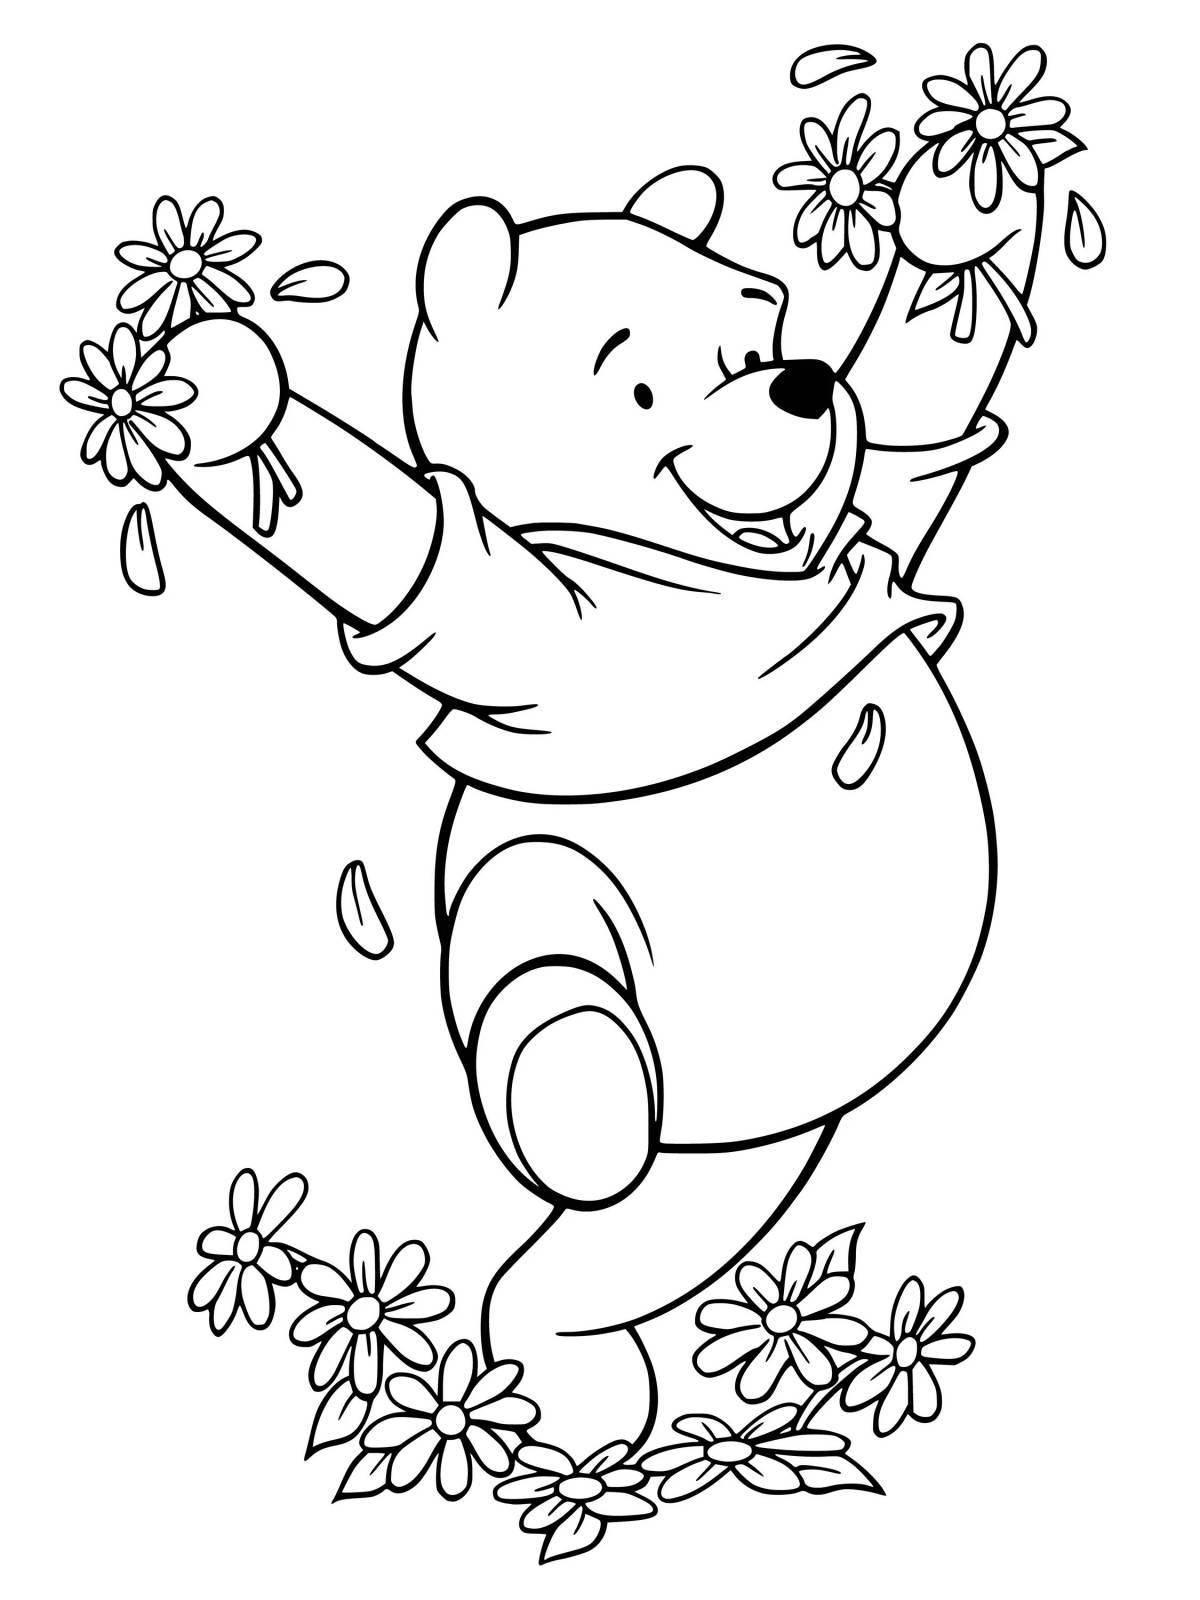 Winnie the Pooh bright coloring for kids